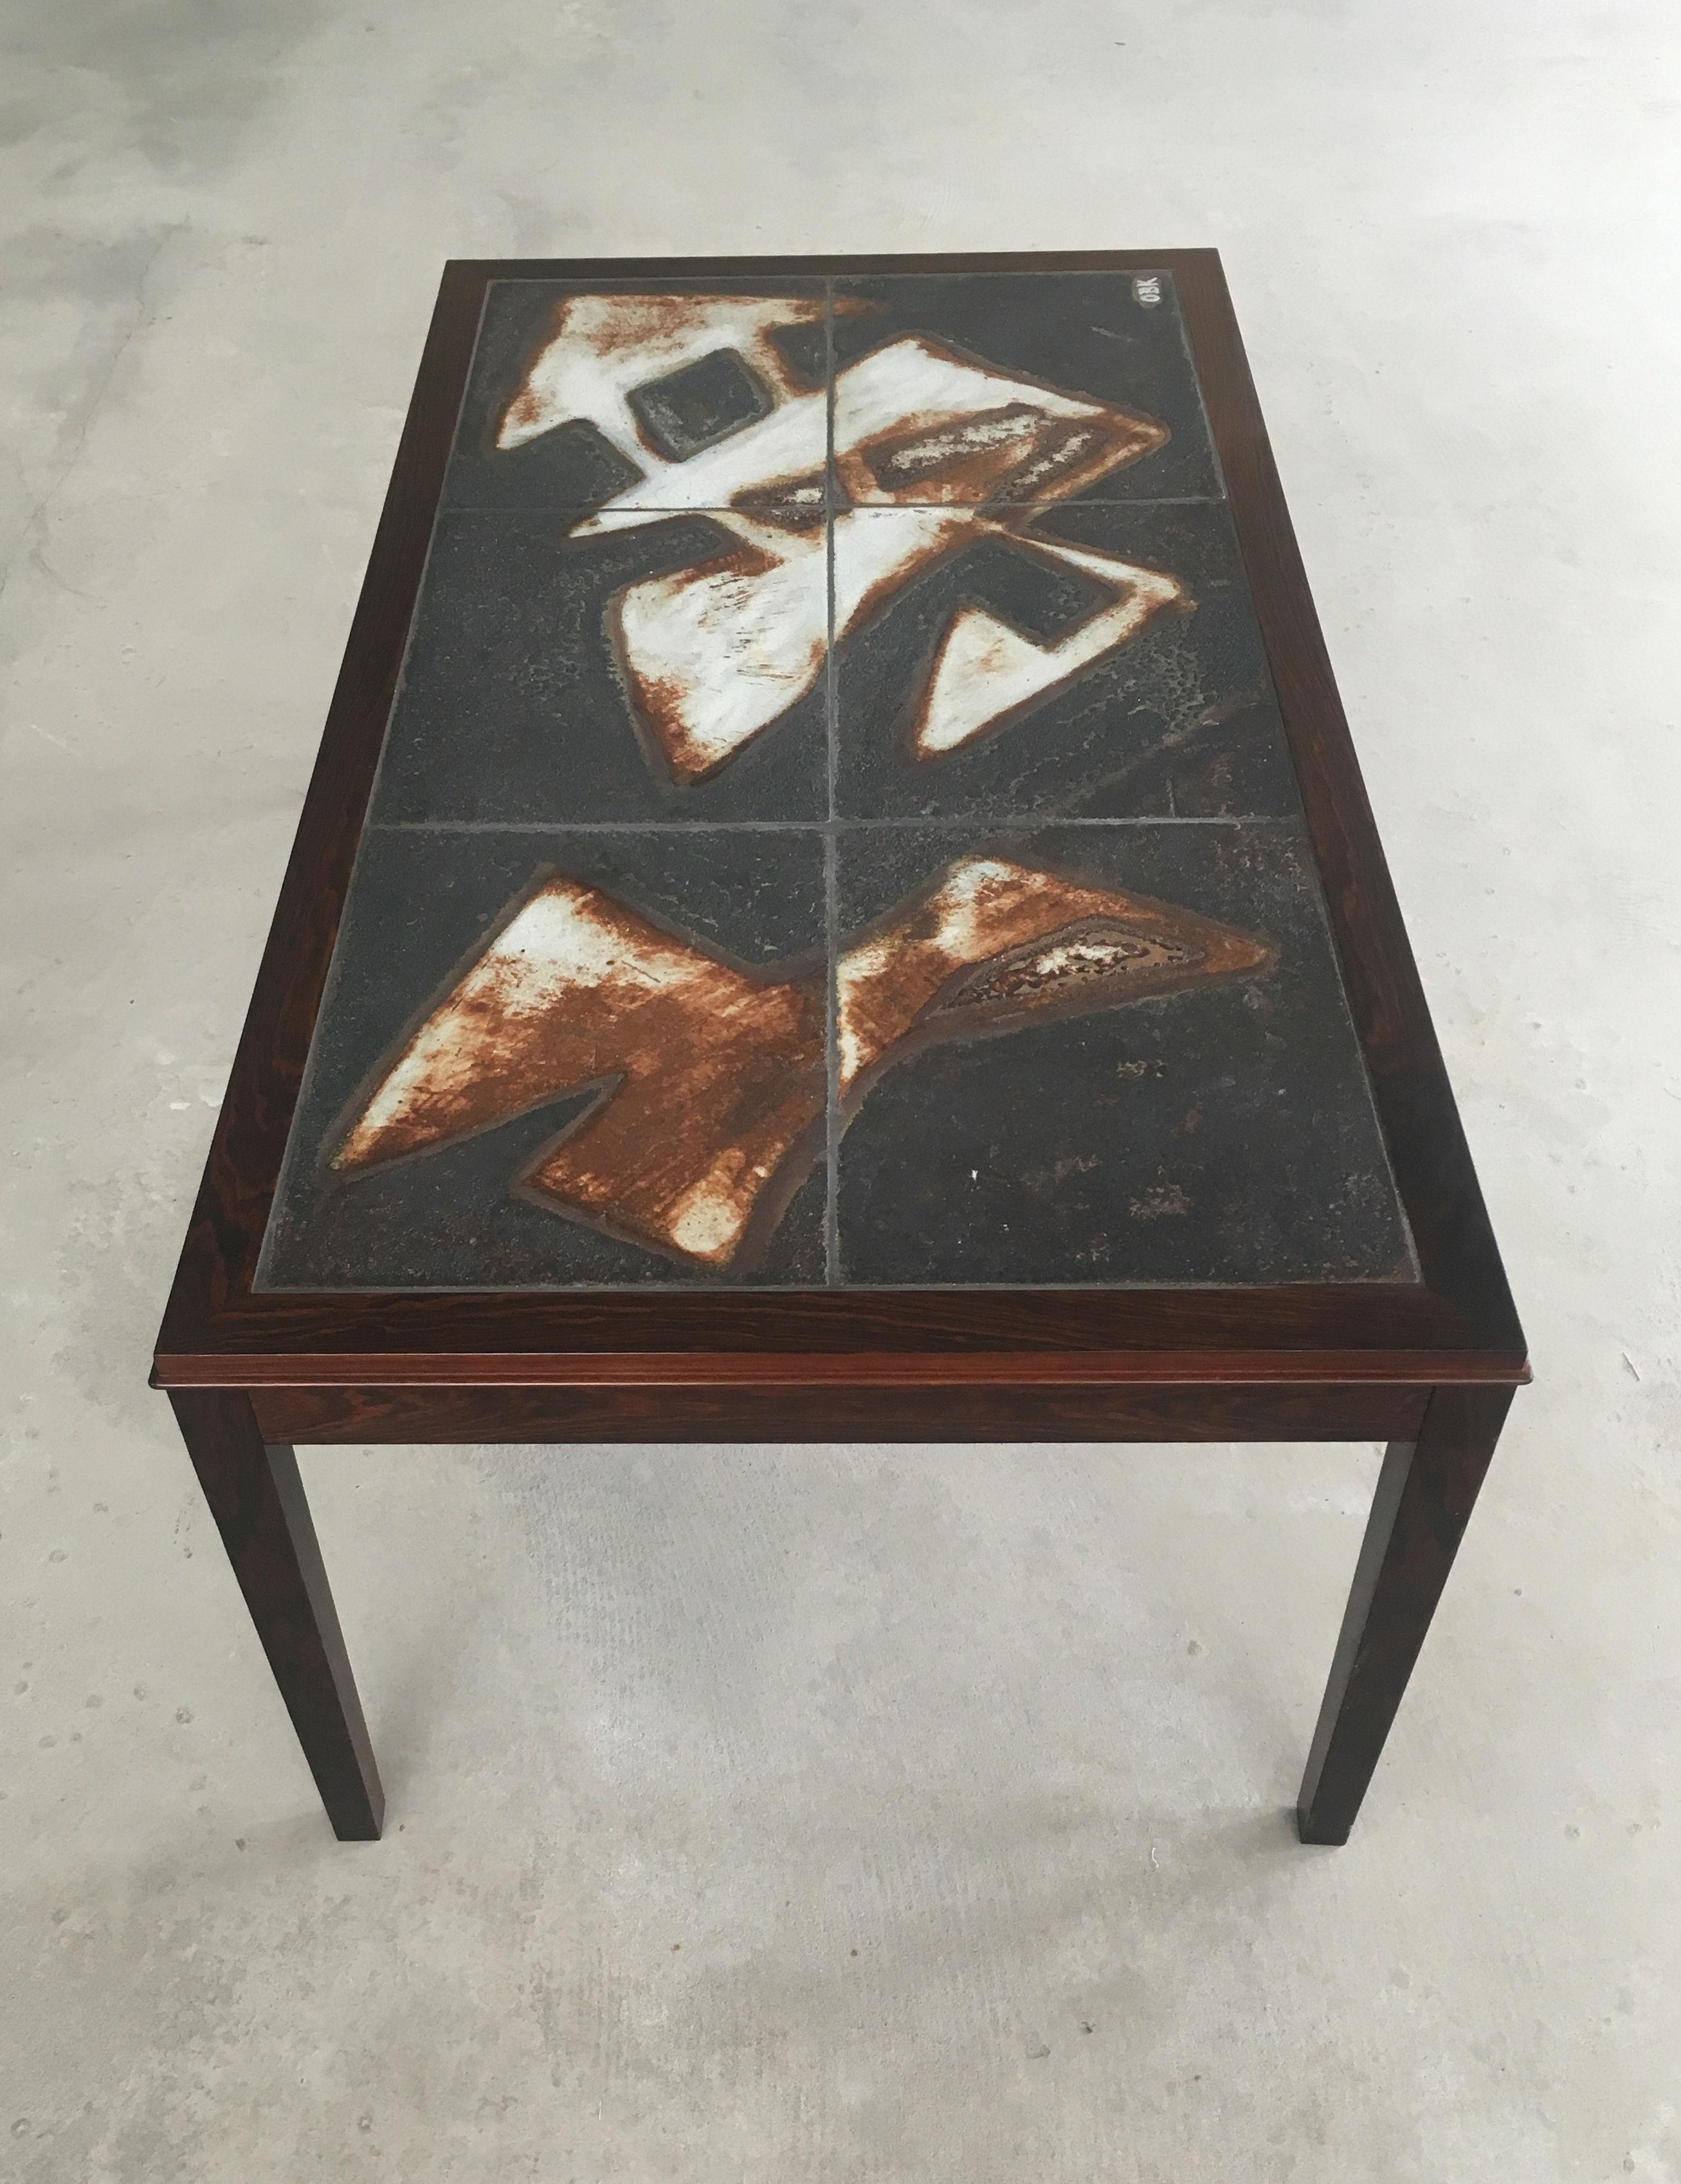 Tile topped coffee table in rosewood and abstract stoneware tile designed and signed by Danish artist Ole Bjørn Krüger.

The coffee table has been restored and refinished by our cabinermaker and is in very good condition.

We are shipping our pieces